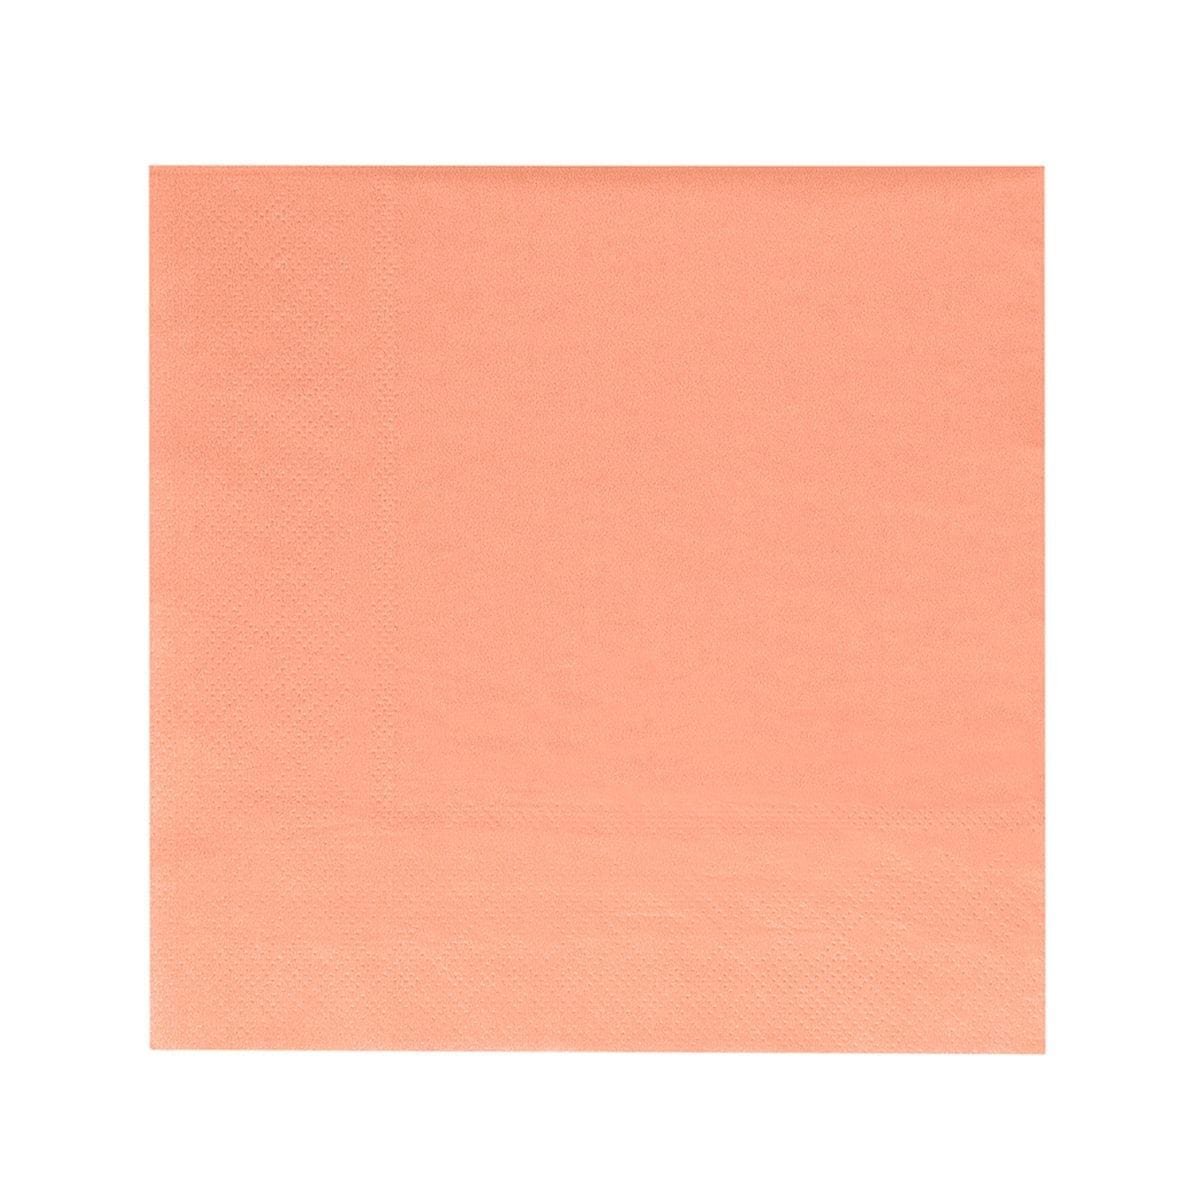 YIWU SANDY PAPER PRODUCTS CO., LTD Everyday Entertaining Orange Lunch Napkins, 16 Count